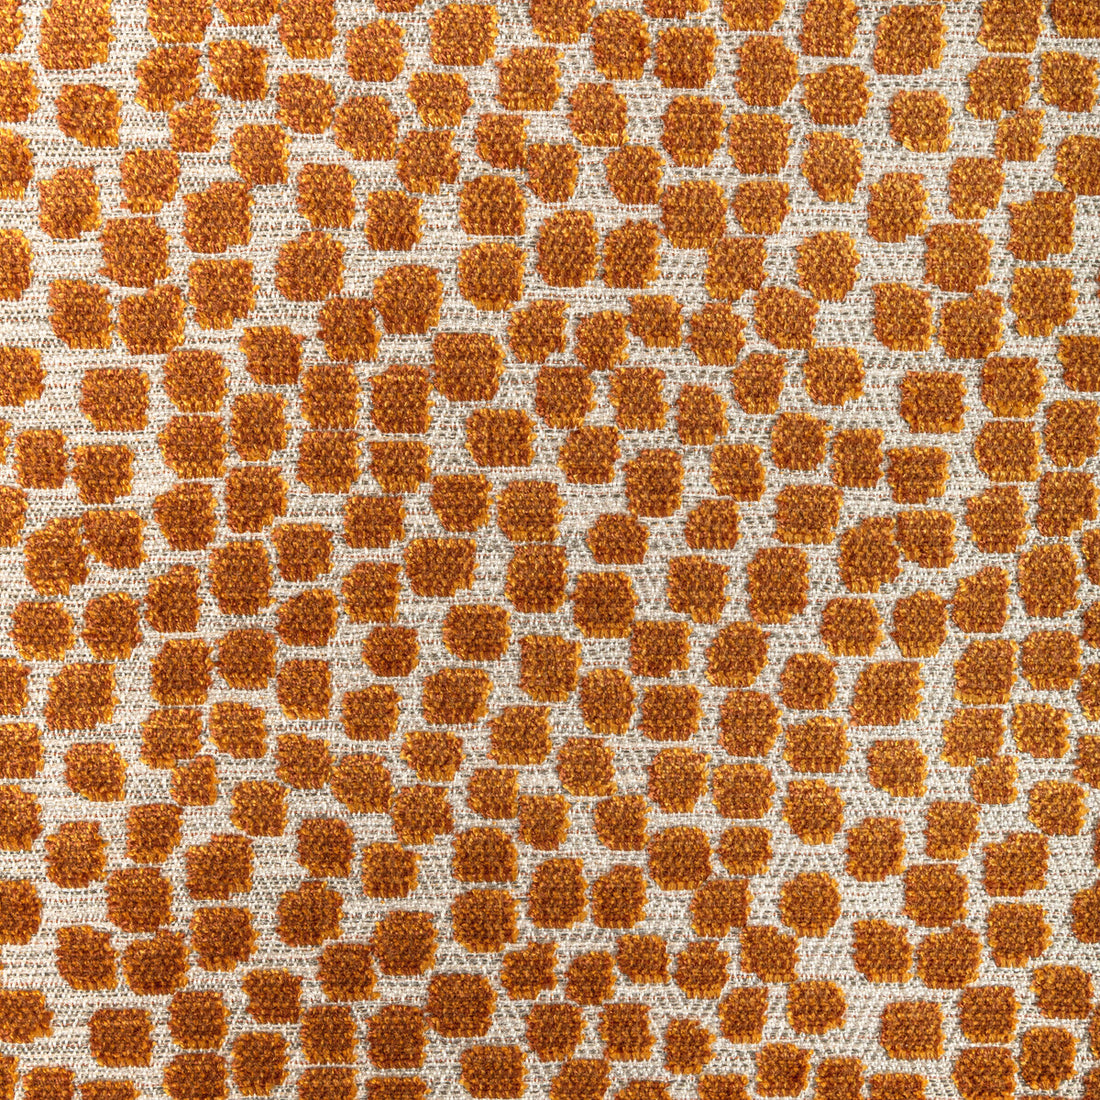 Flurries fabric in terracotta color - pattern 34849.24.0 - by Kravet Design in the Thom Filicia collection